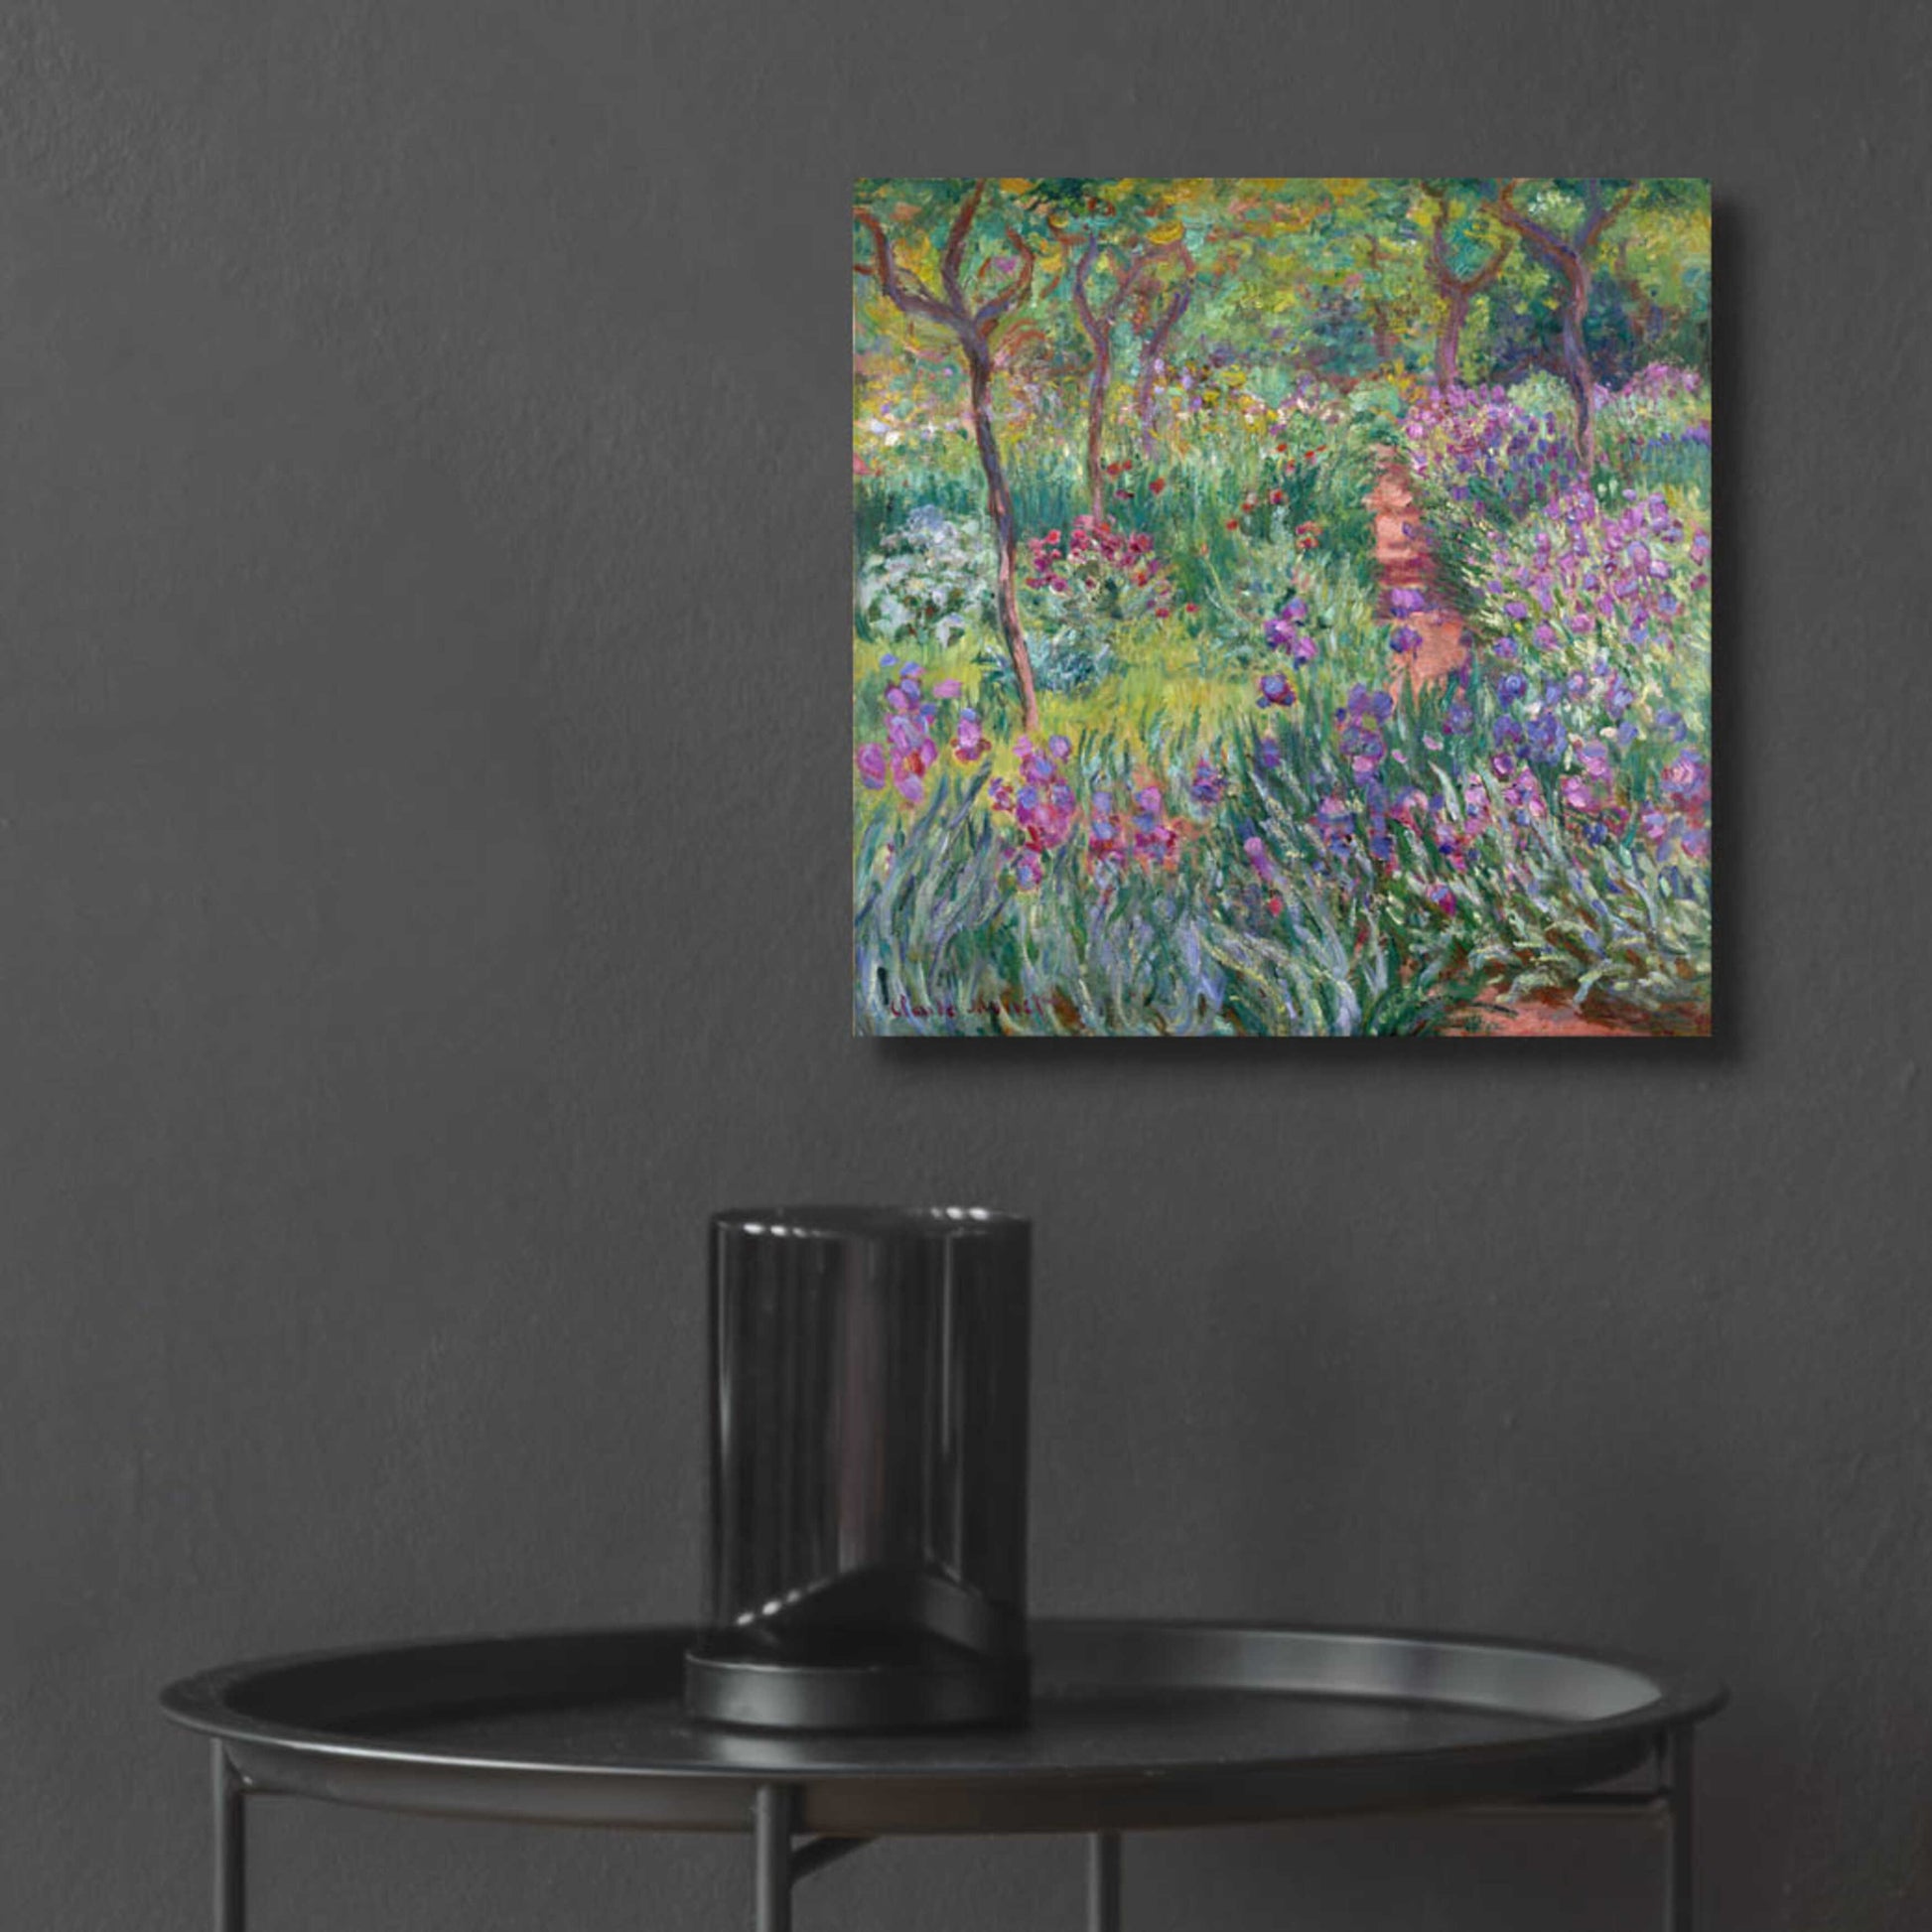 Epic Art 'The Artist’s Garden In Giverny' by Claude Monet, Acrylic Glass Wall Art,12x12